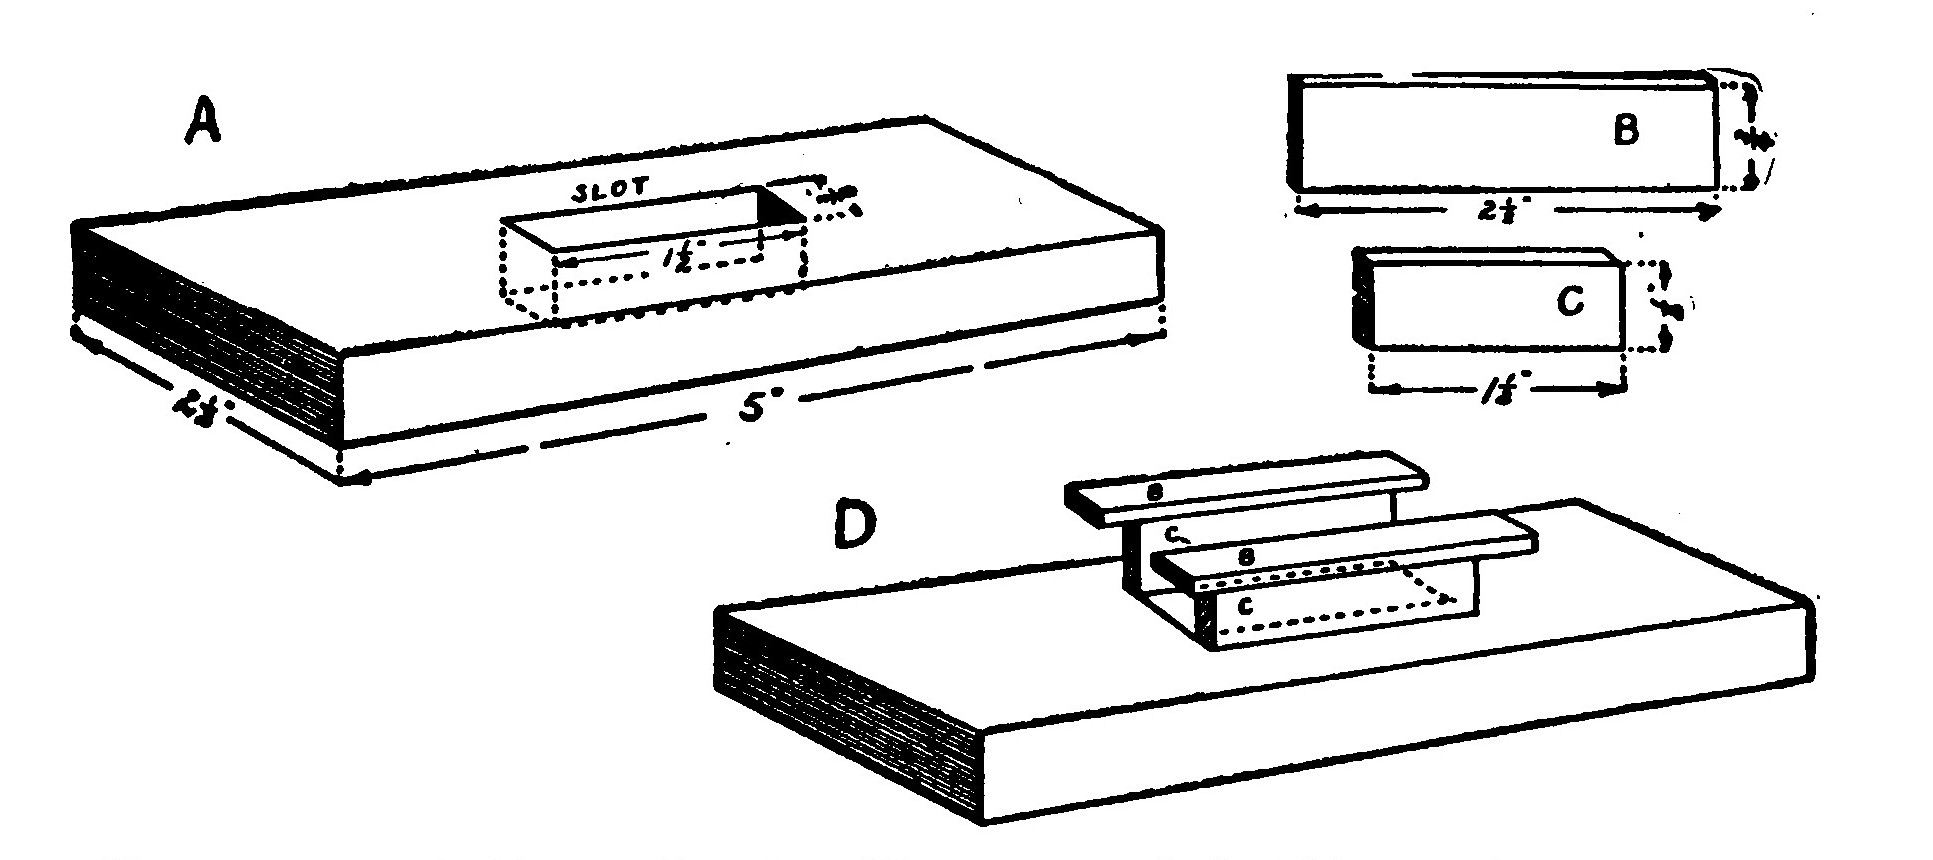 Fig. 102.—*A*, Base, showing Slot. *B* and *C*, Sides and Top of the Bobbin. *D*, Base and Bobbin in Position.